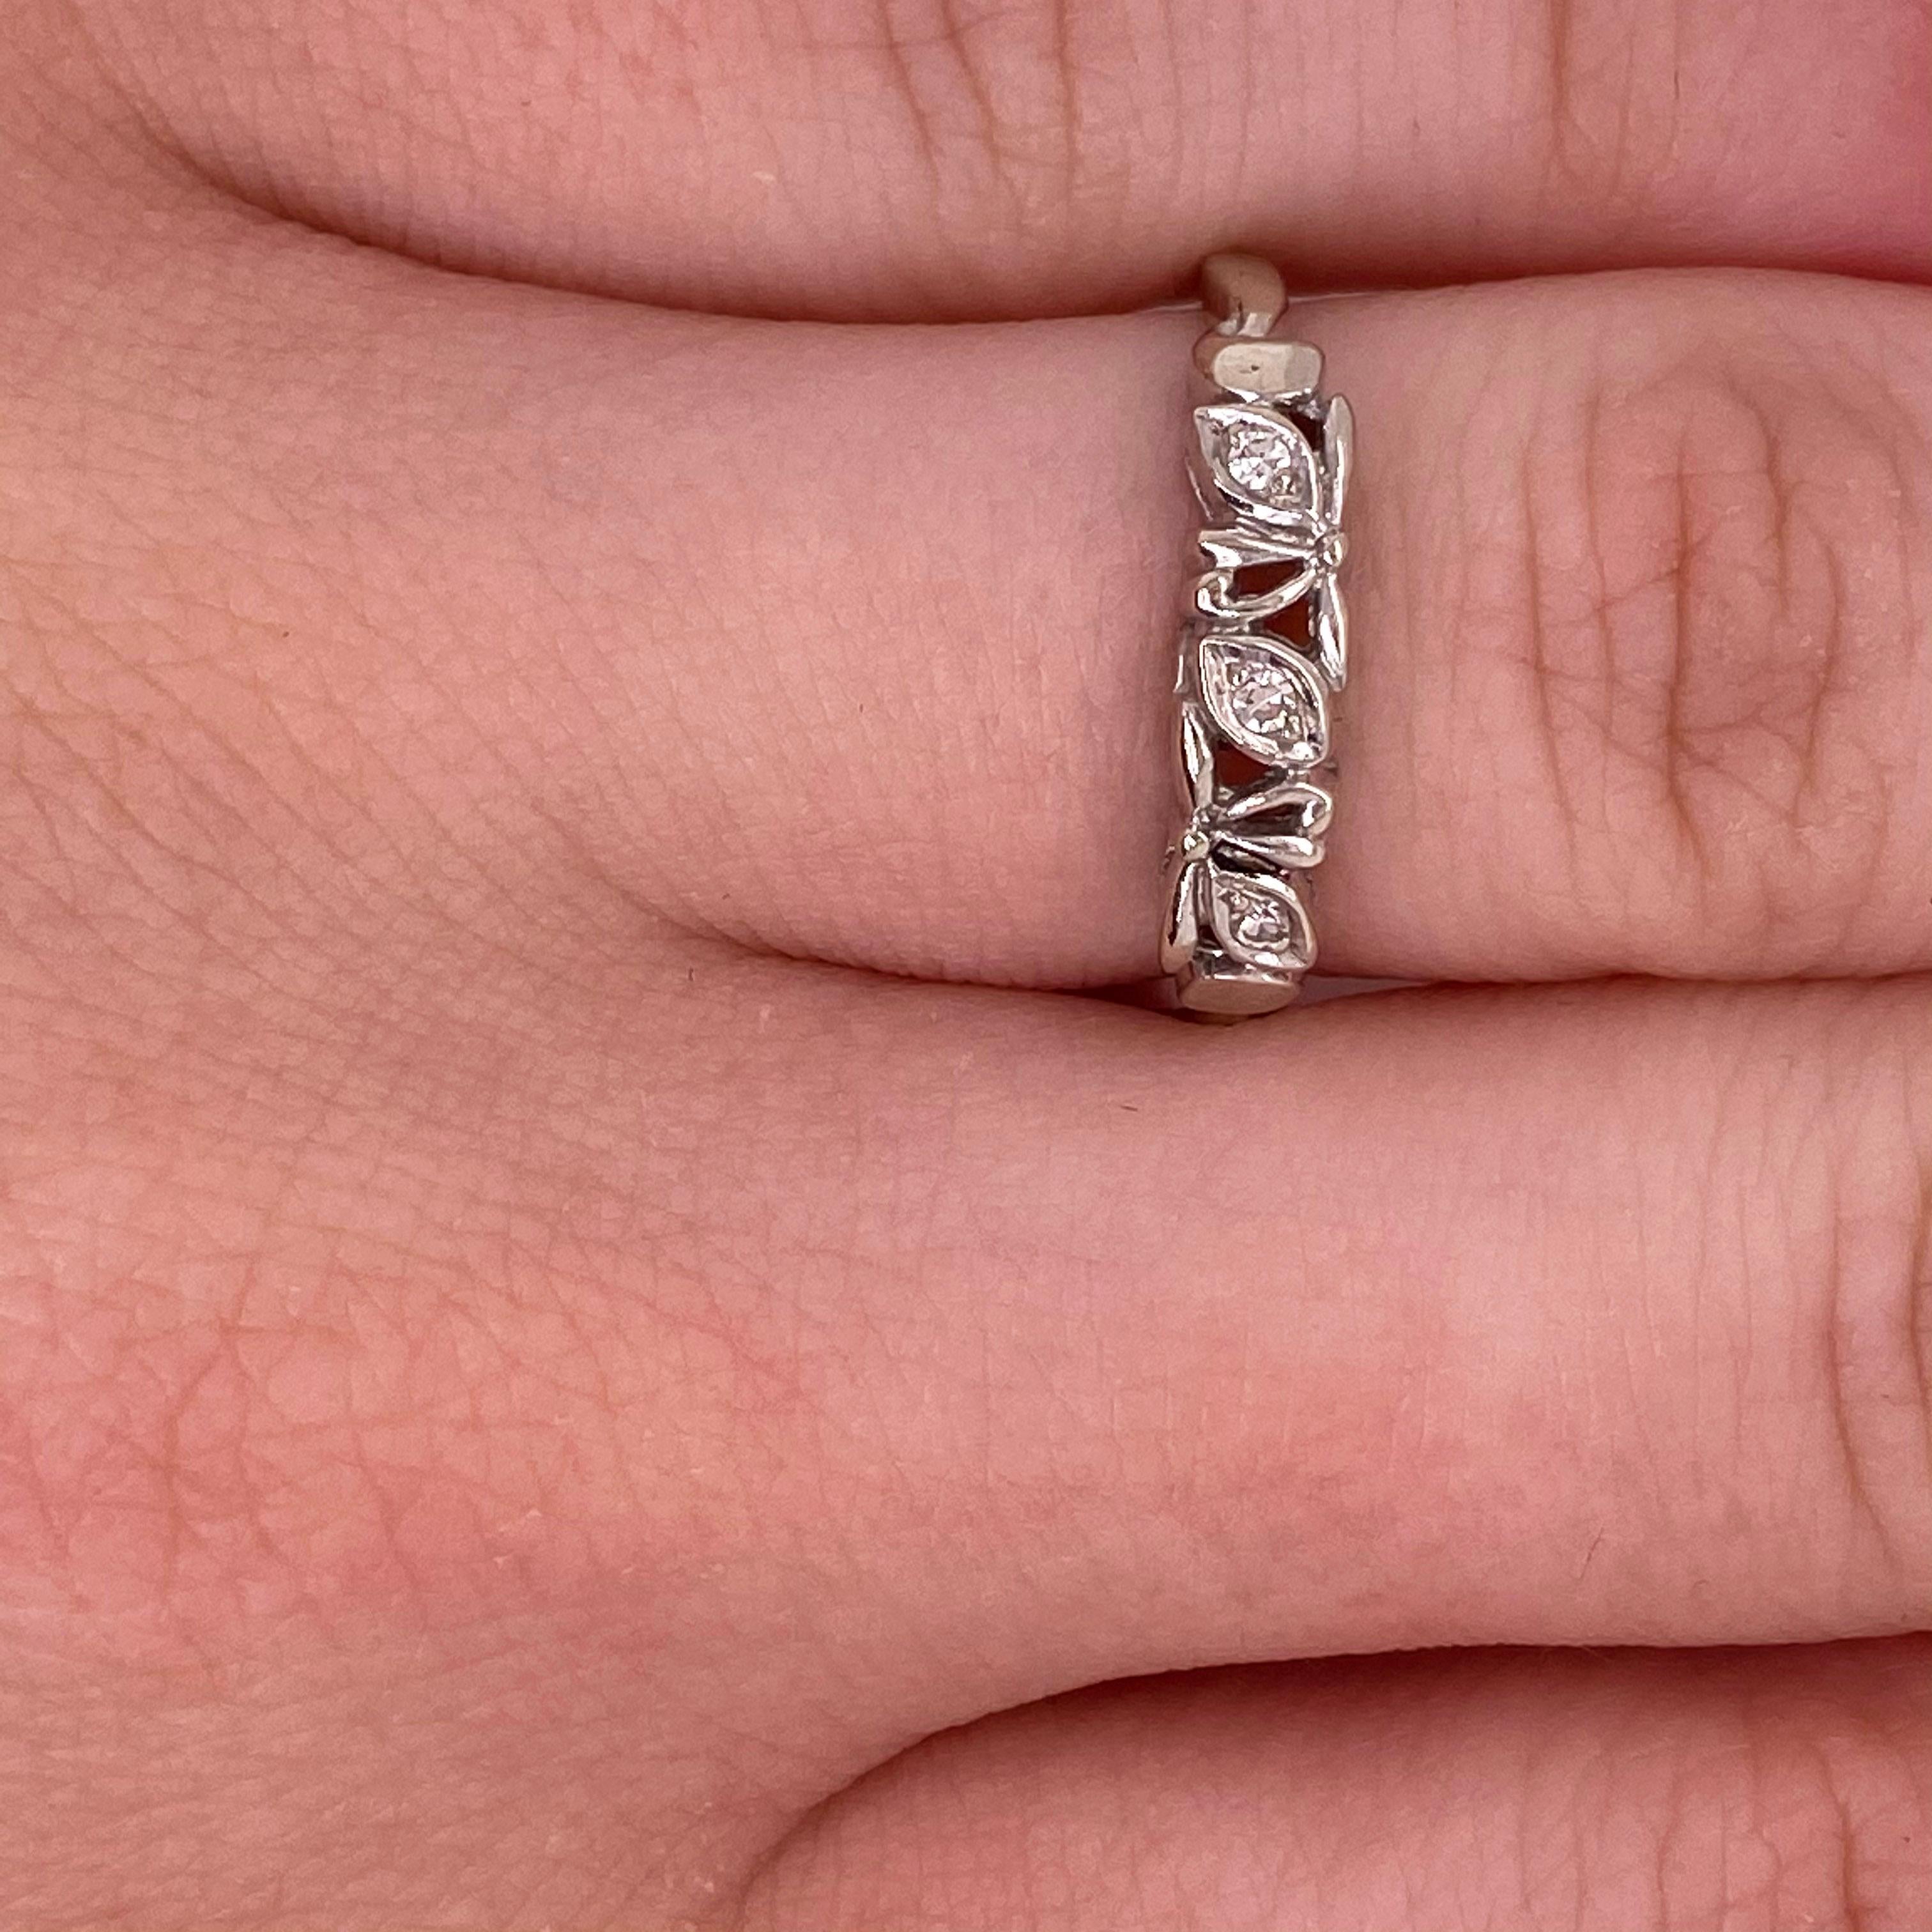 This 1950’s diamond band looks great for a wedding band or as a ring for any finger.  The leaf design is very unique and has three diamonds on it. The band is delicate enough to look good with most engagement rings. The details for this beautiful